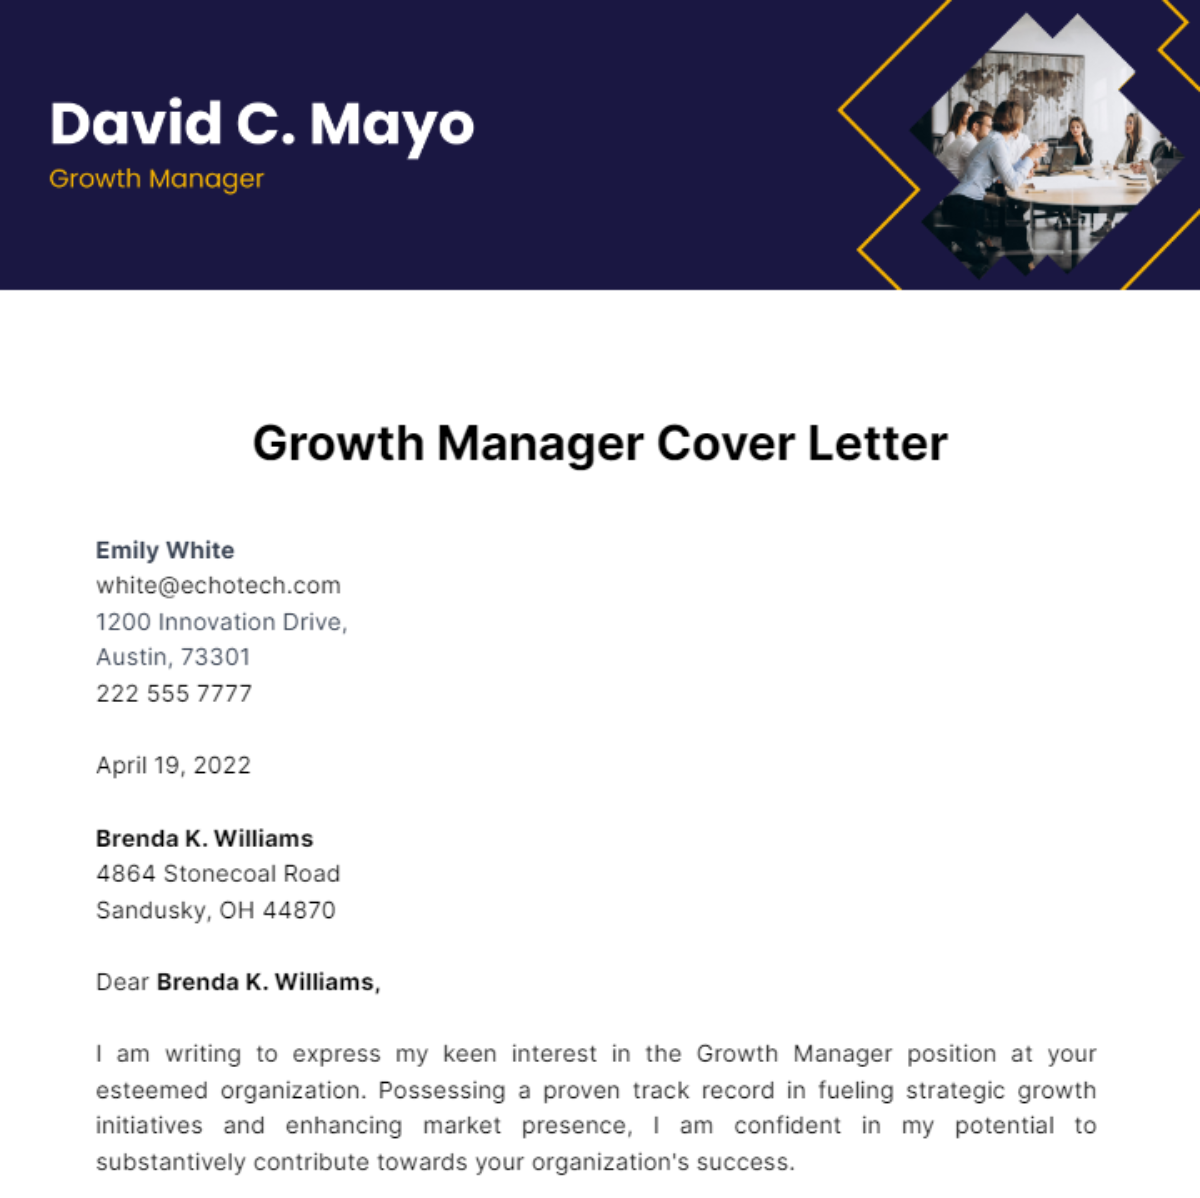 Growth Manager Cover Letter Template